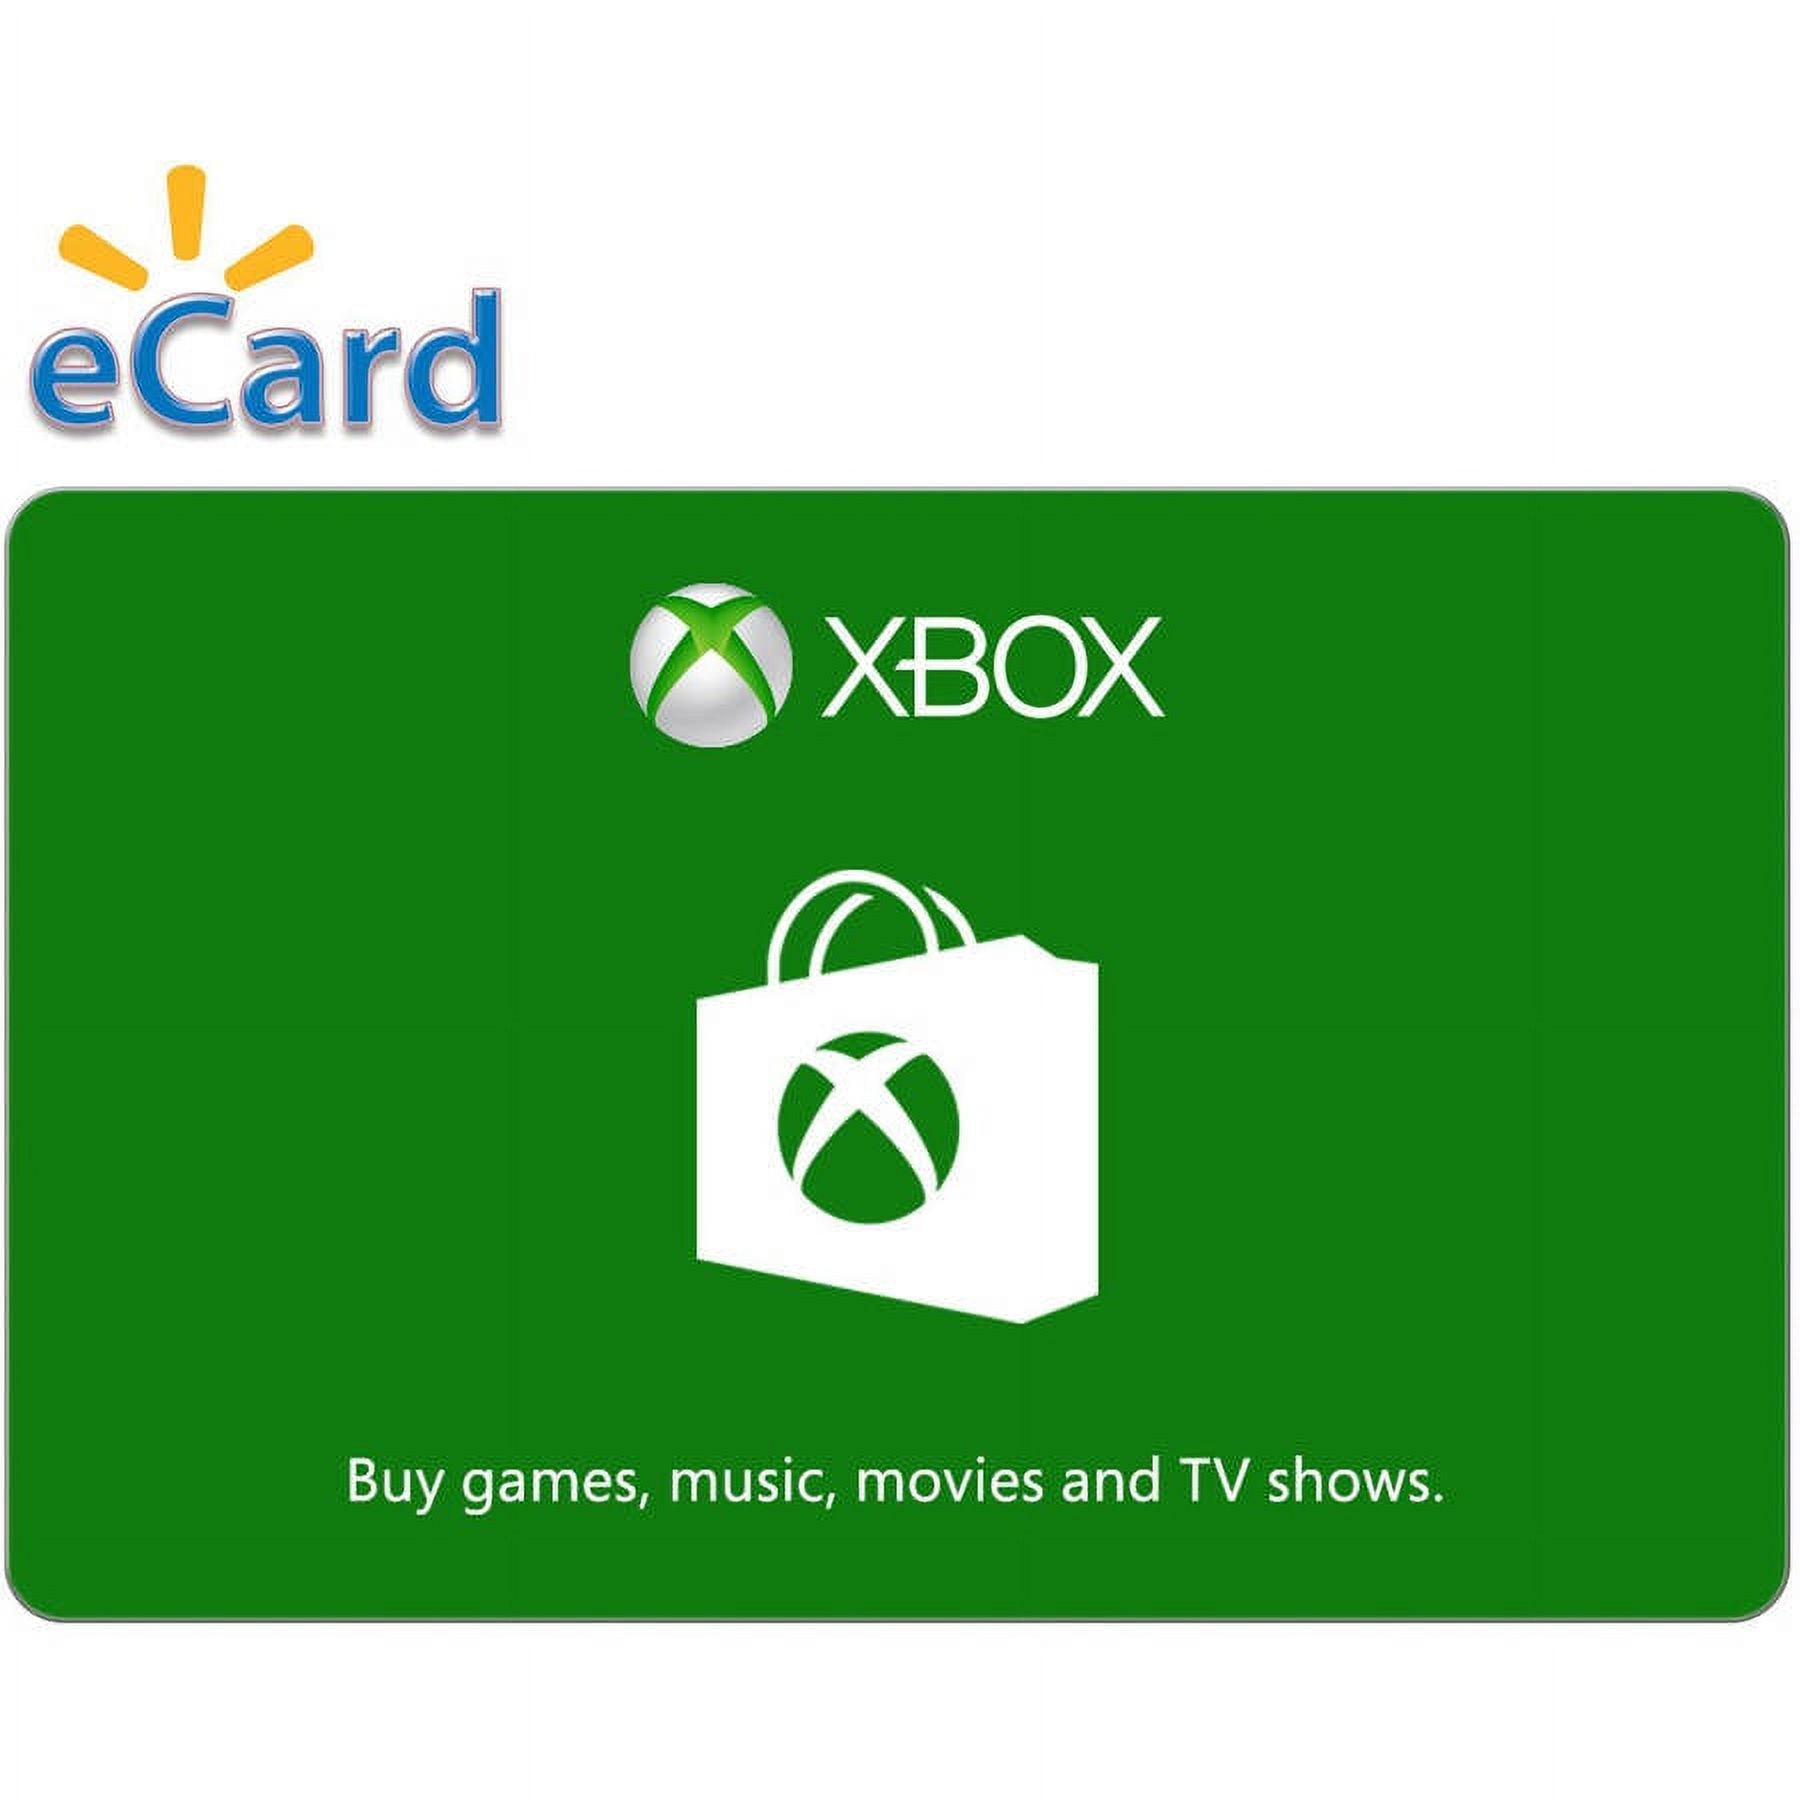 Xbox $20 Gift Card - [Digital] - image 2 of 2